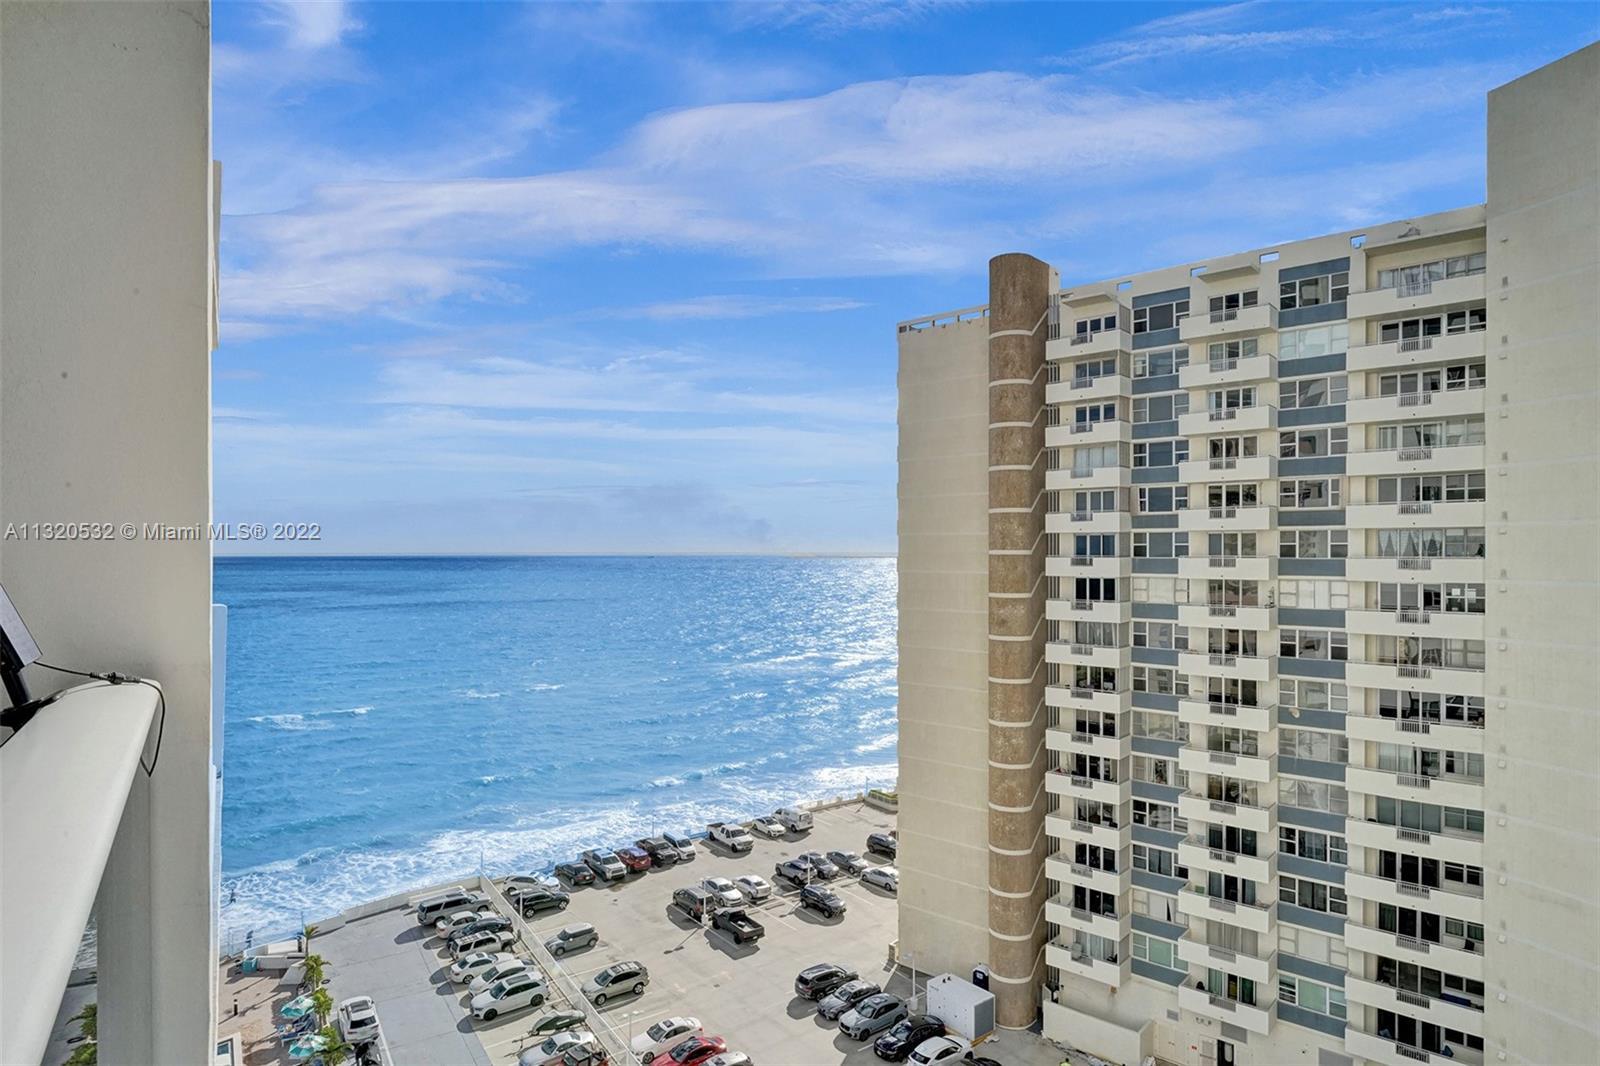 Remodeled unit with a great view and inside jacuzzi, hurricane proof windows and balcony doors. Luxu